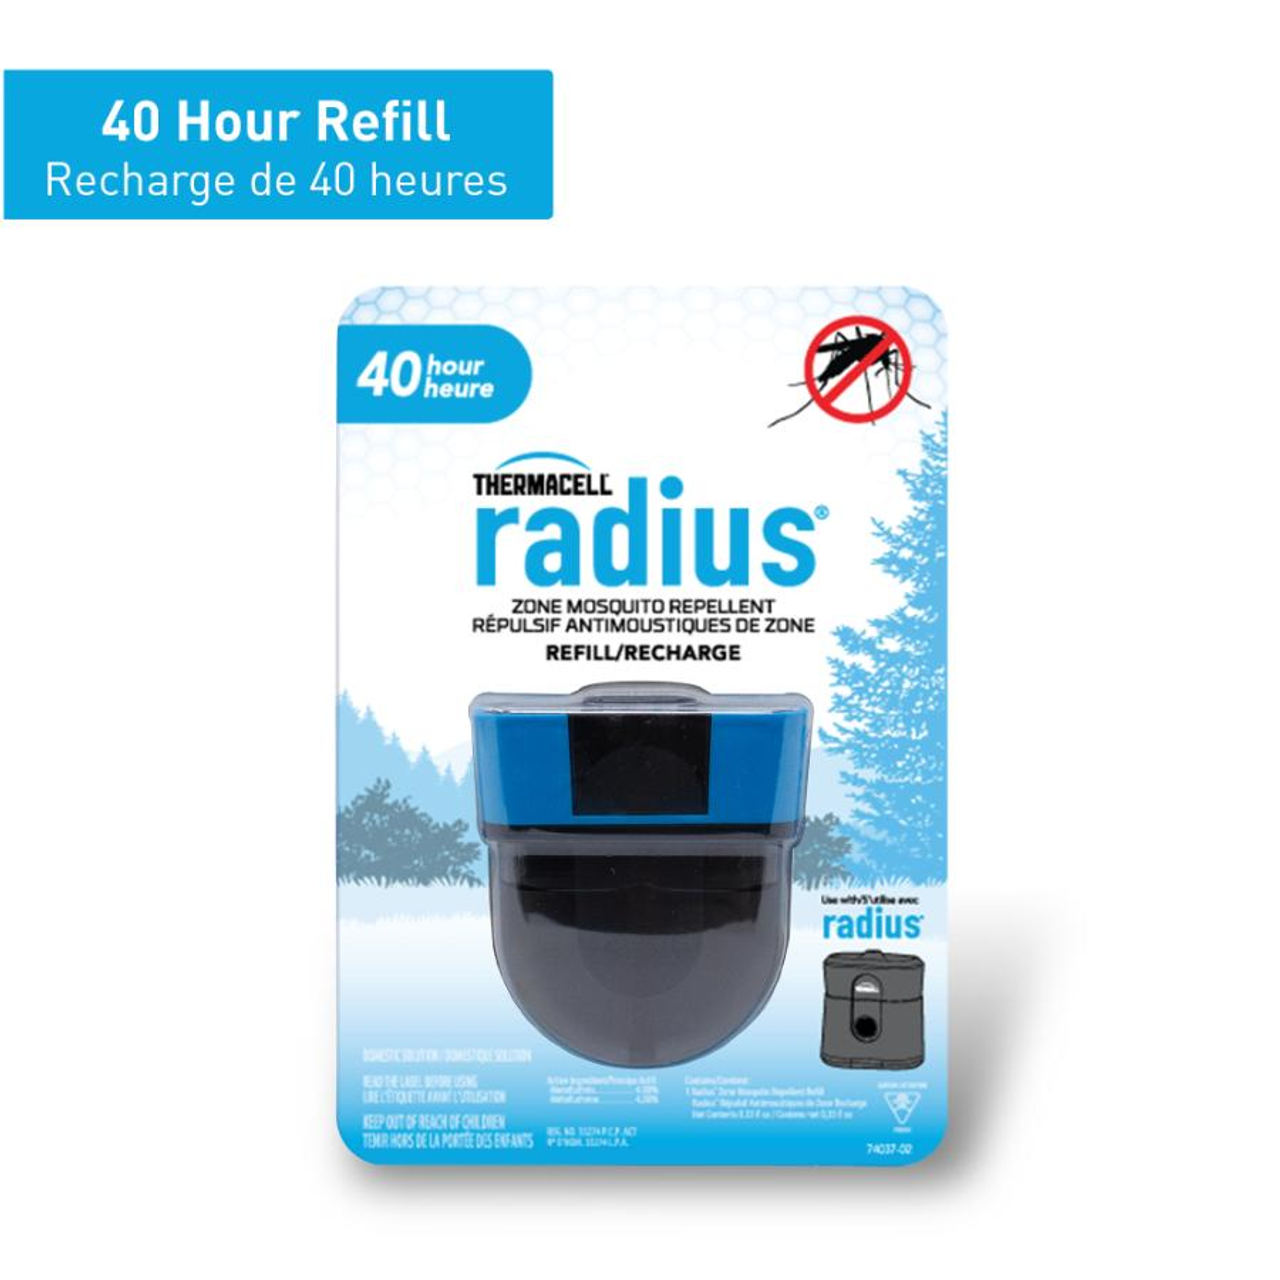 Thermacell Radius Rechargeable Mosquito Repellent 40 Hour Refill